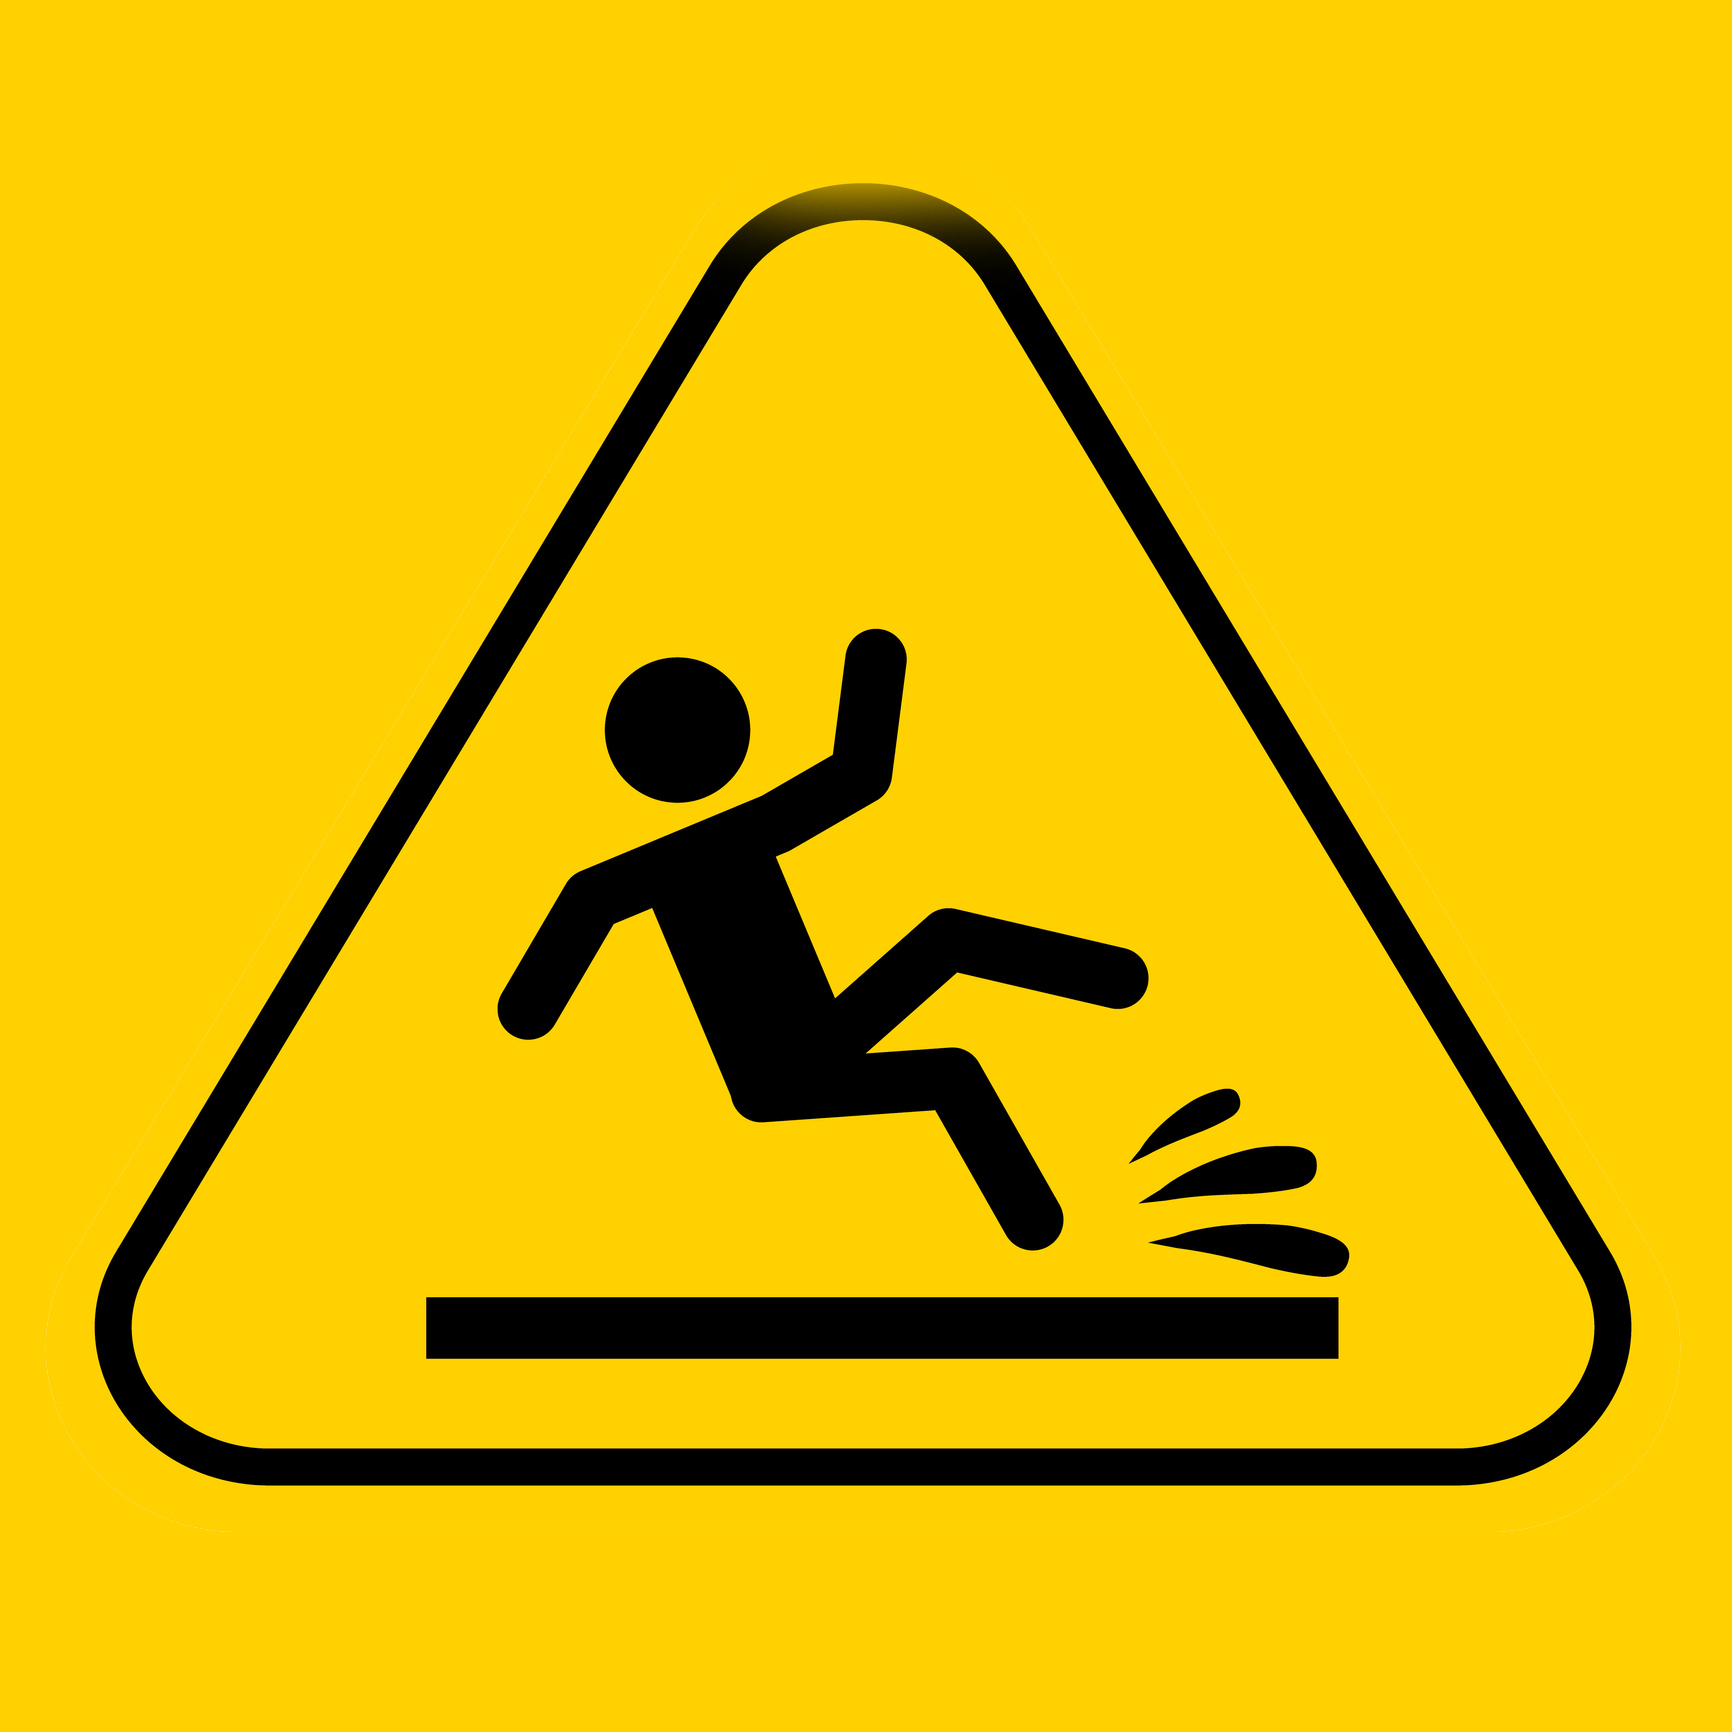 Slip and fall treatment for workplace and WSIB Injuries near me in Waterloo, Ontario